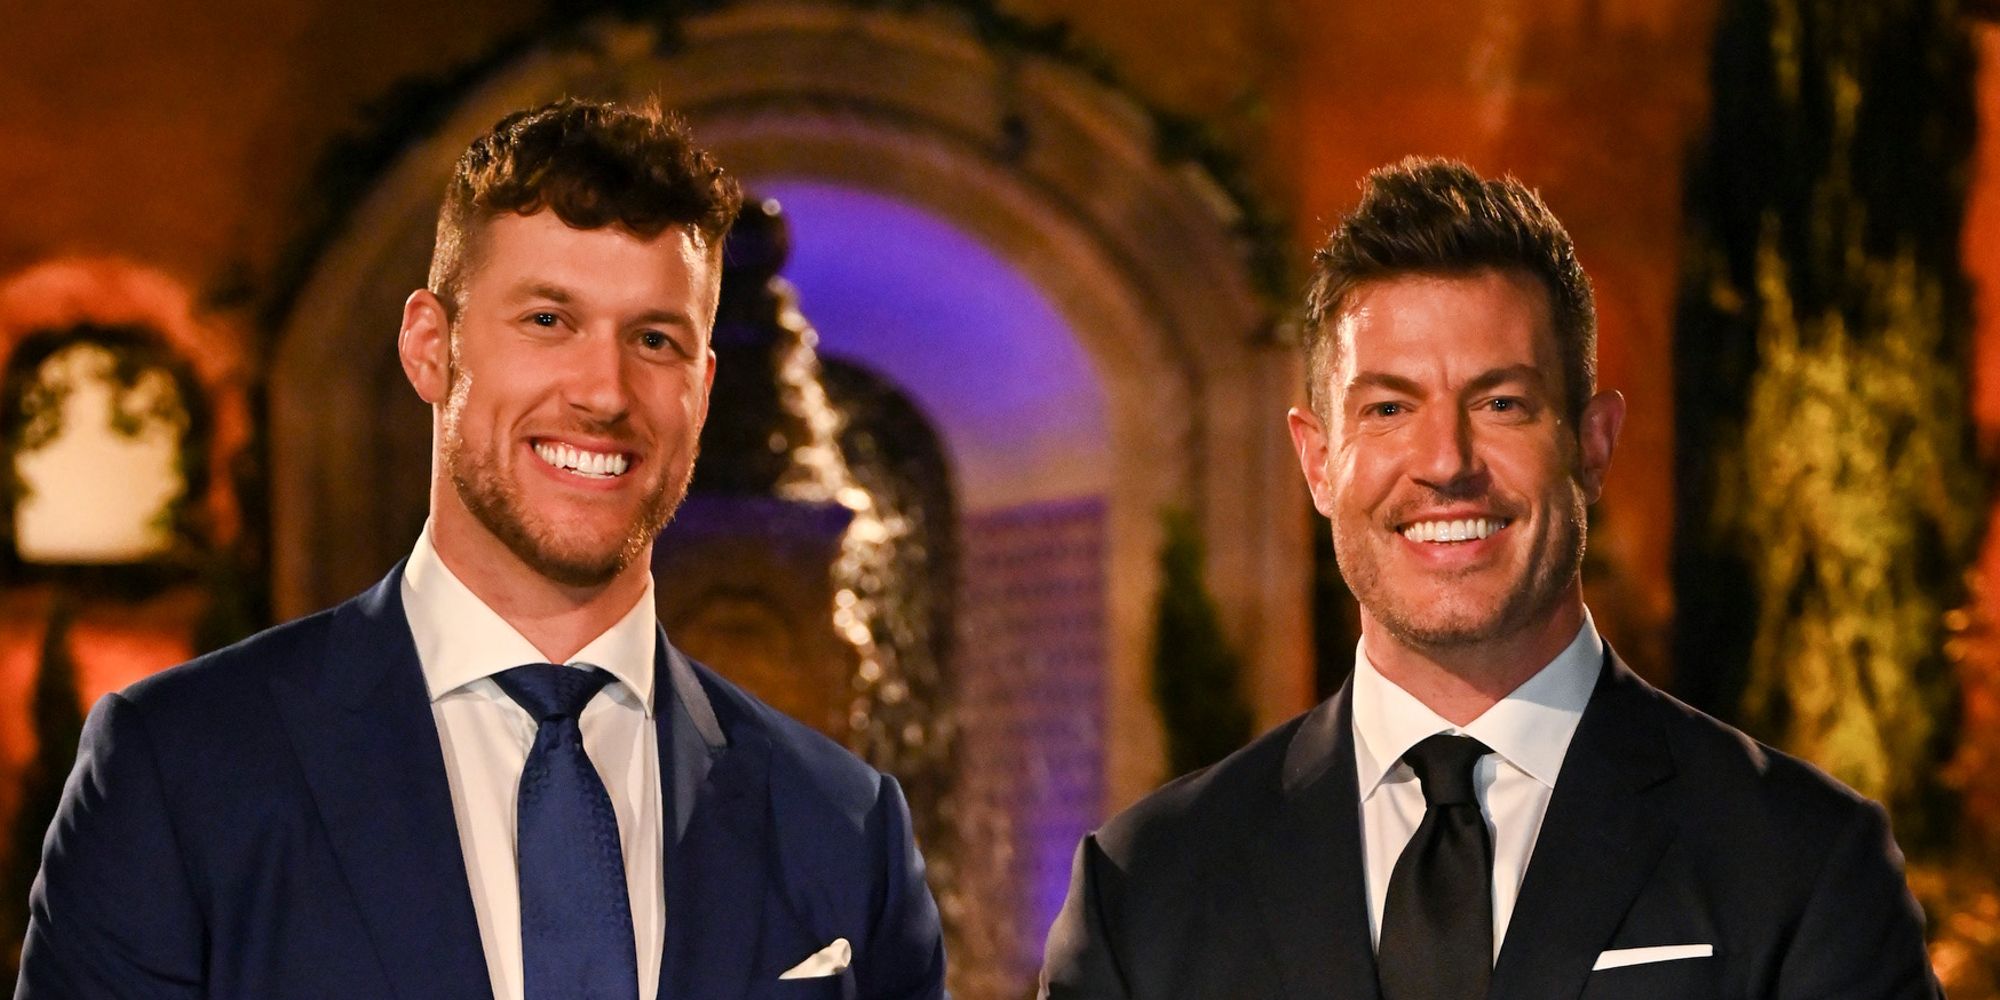 The Bachelor: Why Jesse Palmer Isn’t Resonating With Viewers As Host